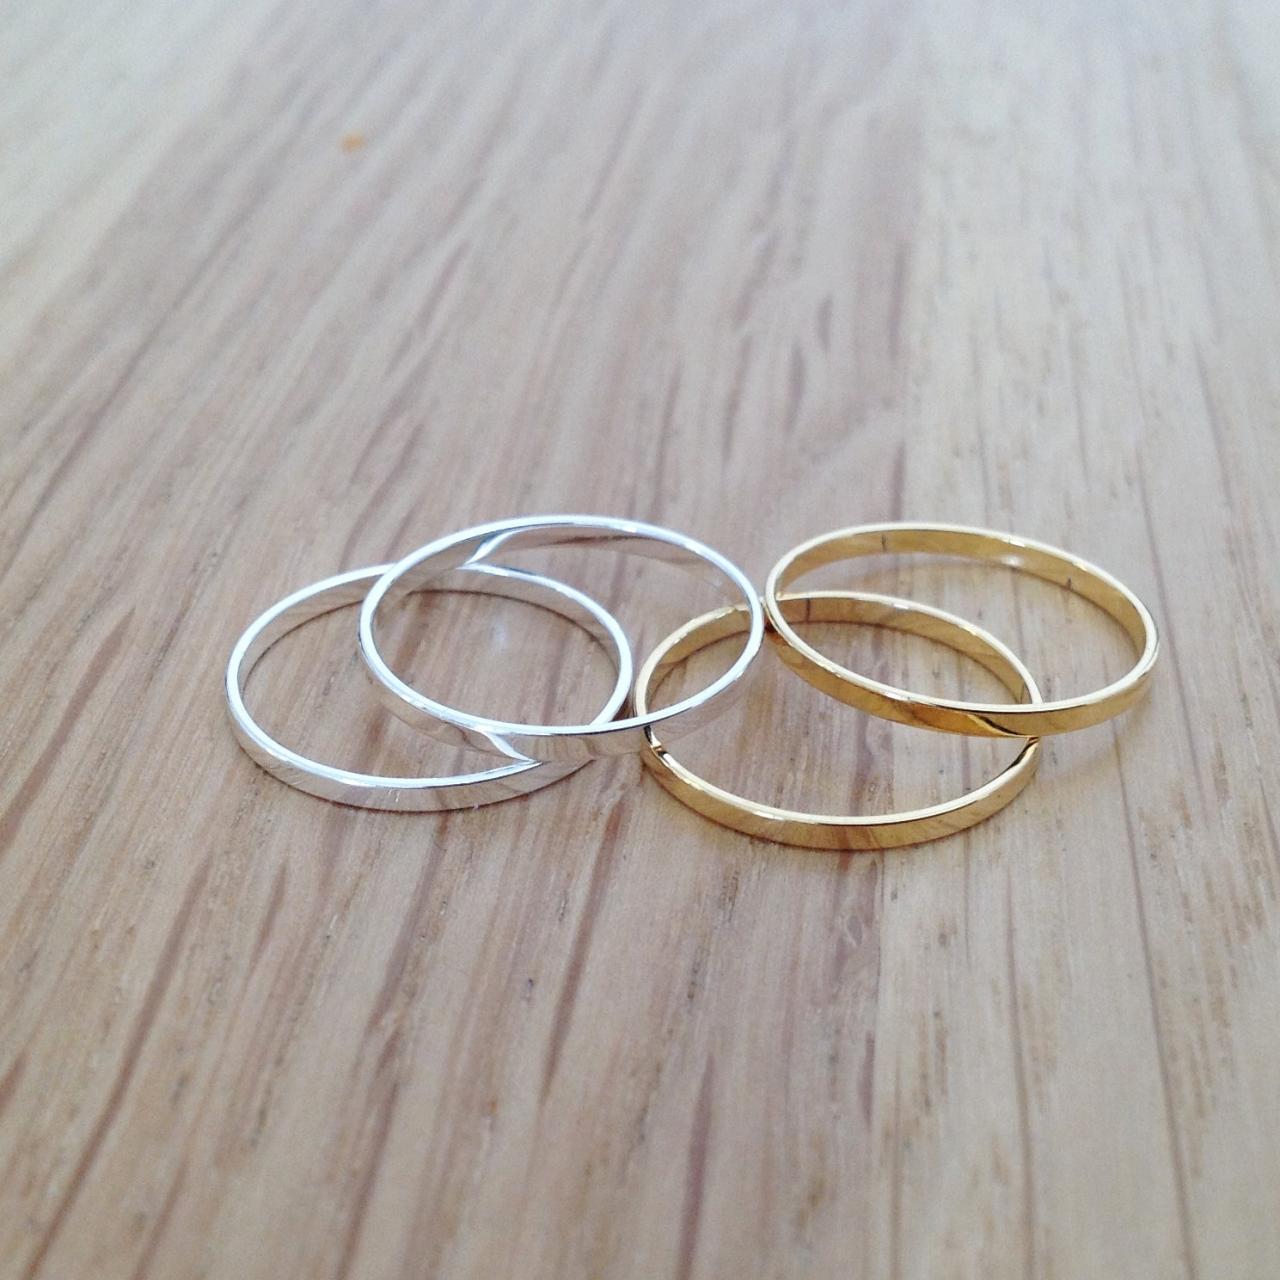 Set Of 4 Rings, Stacking Rings, Knuckle Rings, Thin Rings, Tiny Ring, Stackable Rings, 1silver Knuckle Rings A10